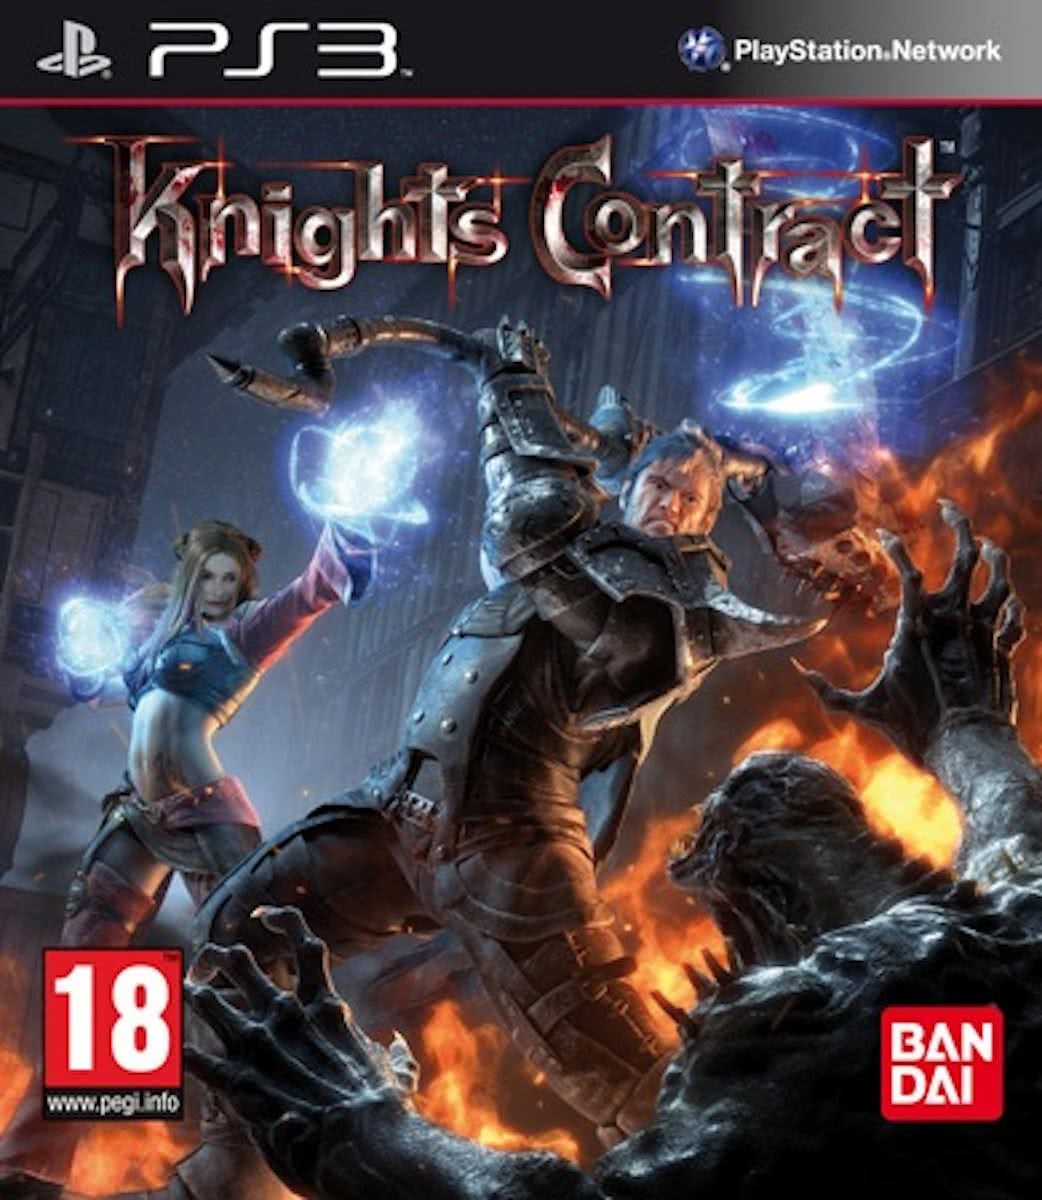 Knights Contract  PS3